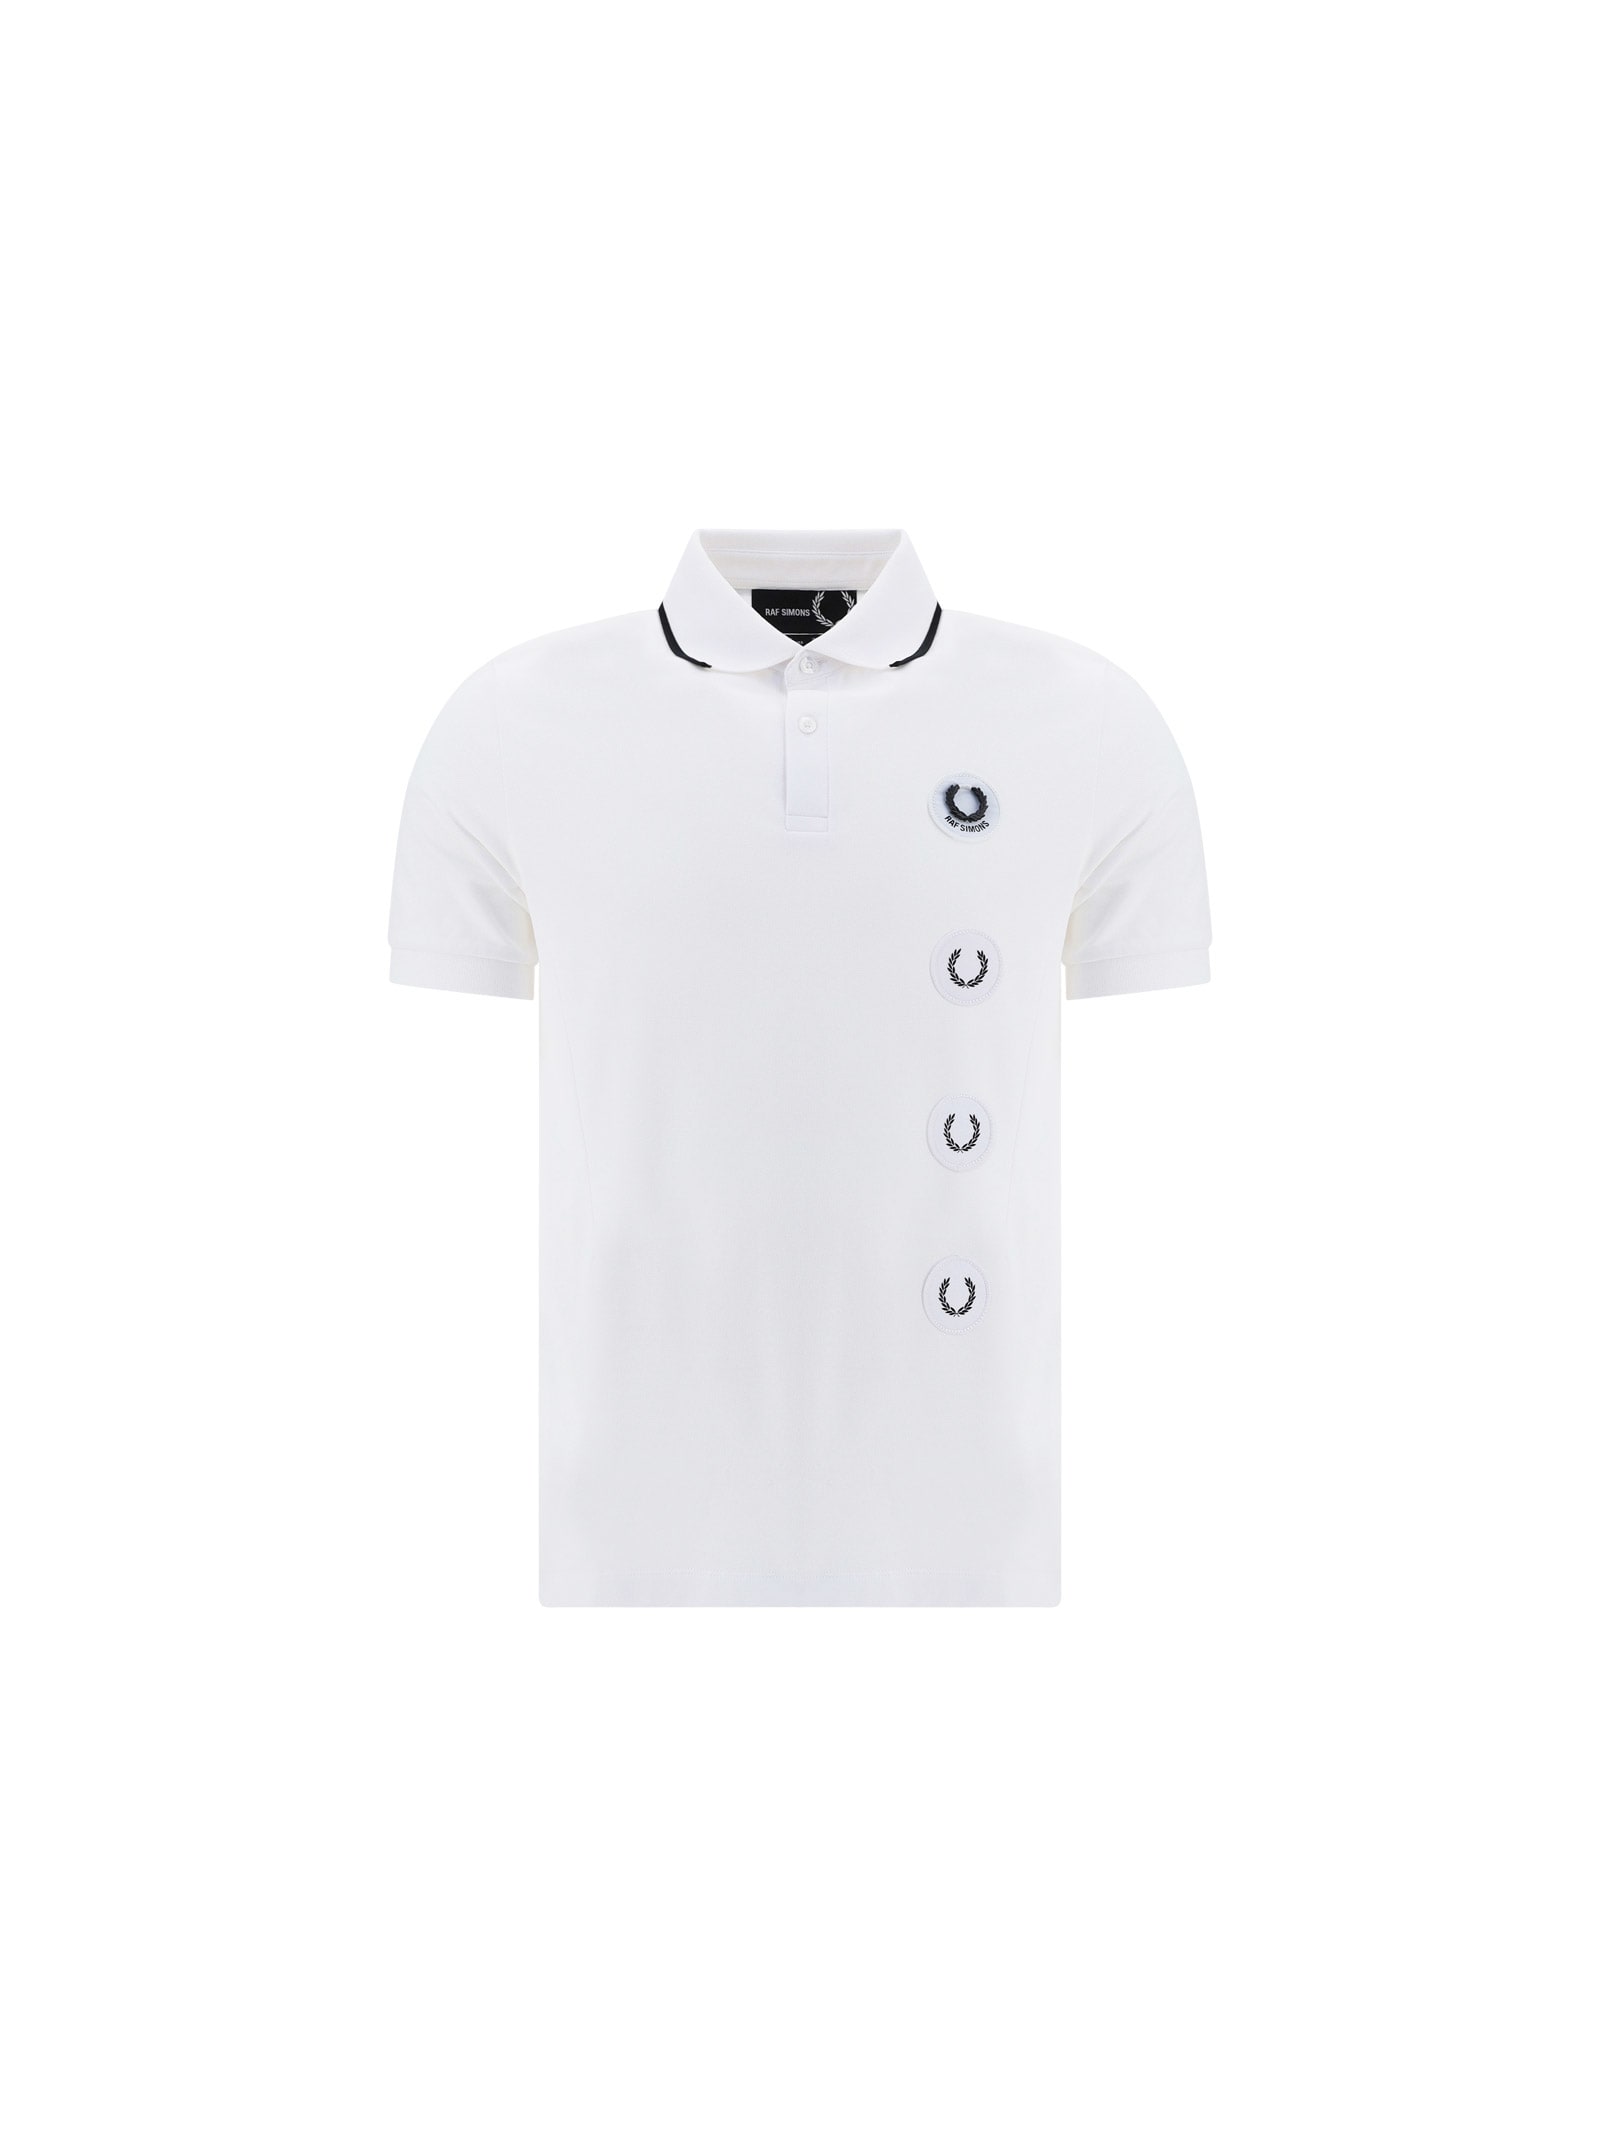 FRED PERRY POLO SHIRT